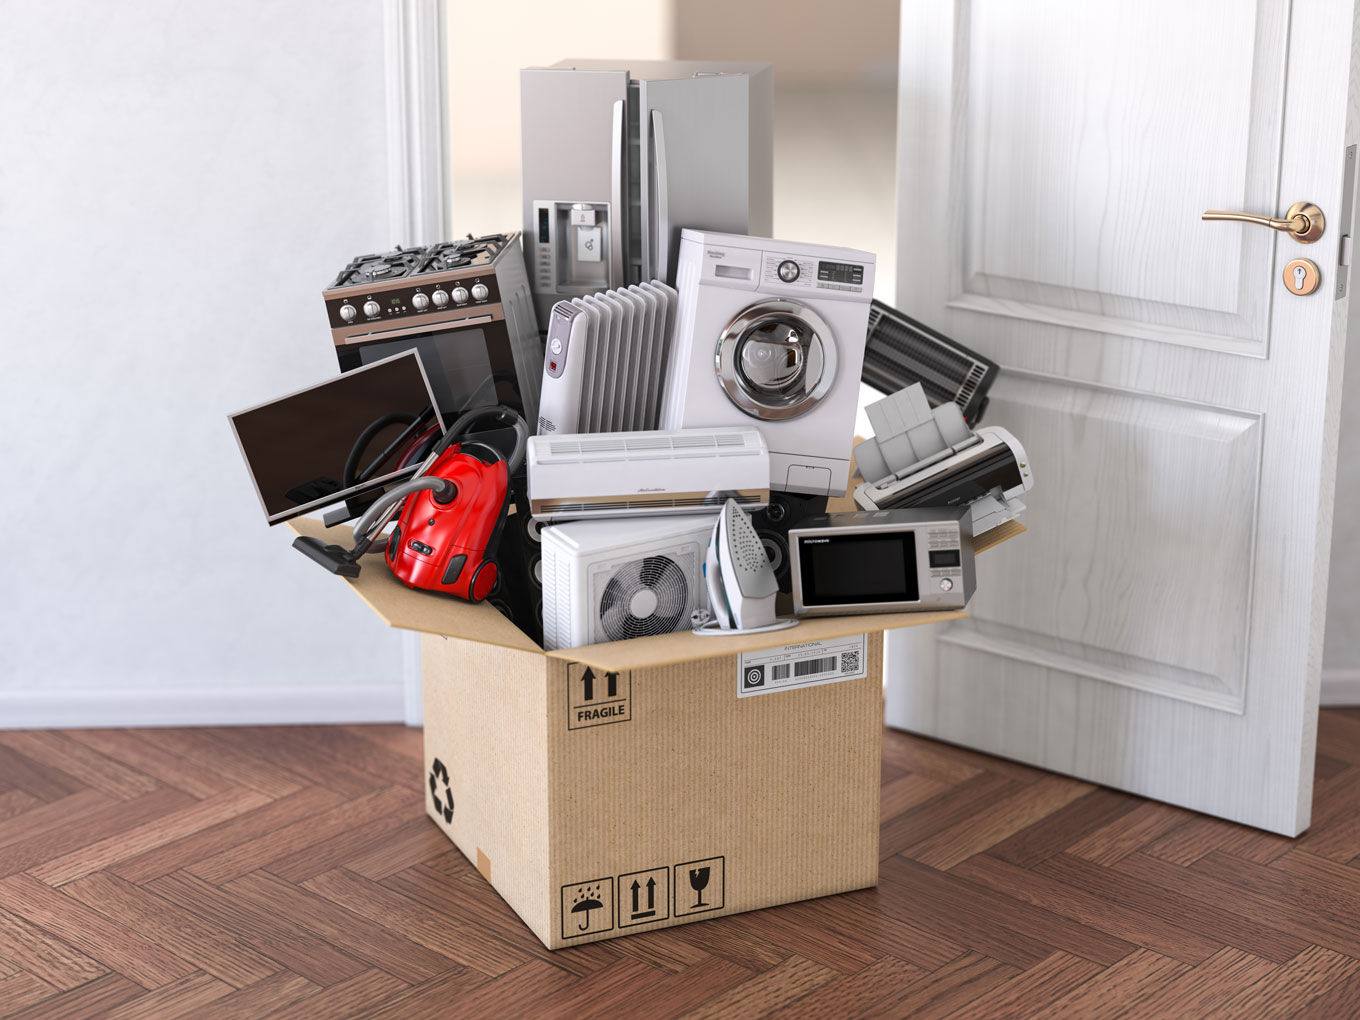 A box full of household appliances.